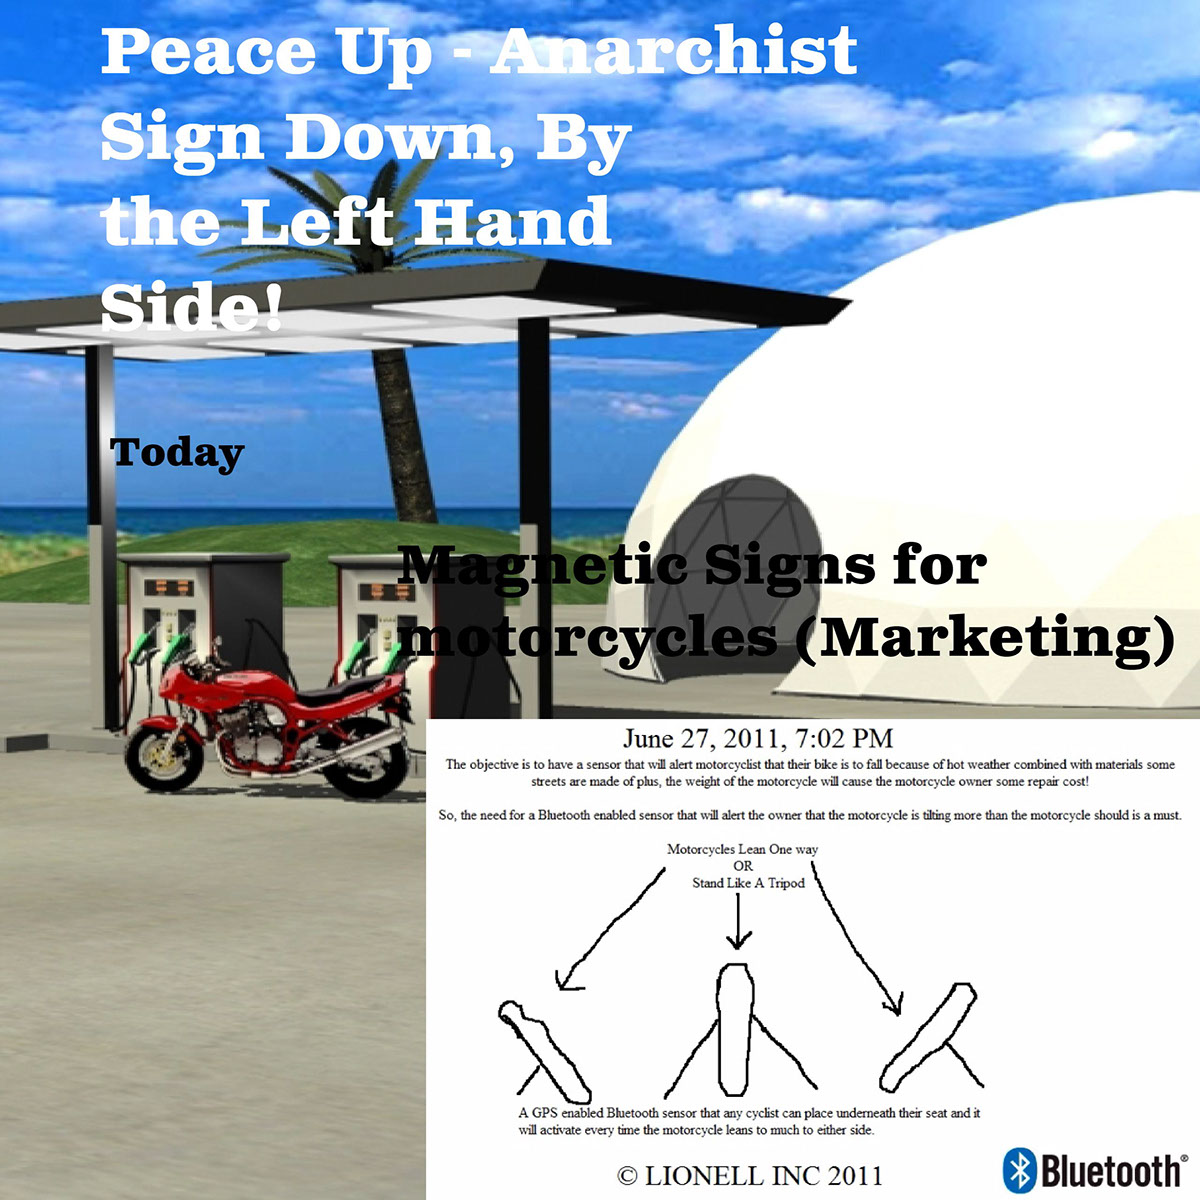 Peace Up - Anarchist Sign Down, By the Left Hand Side!